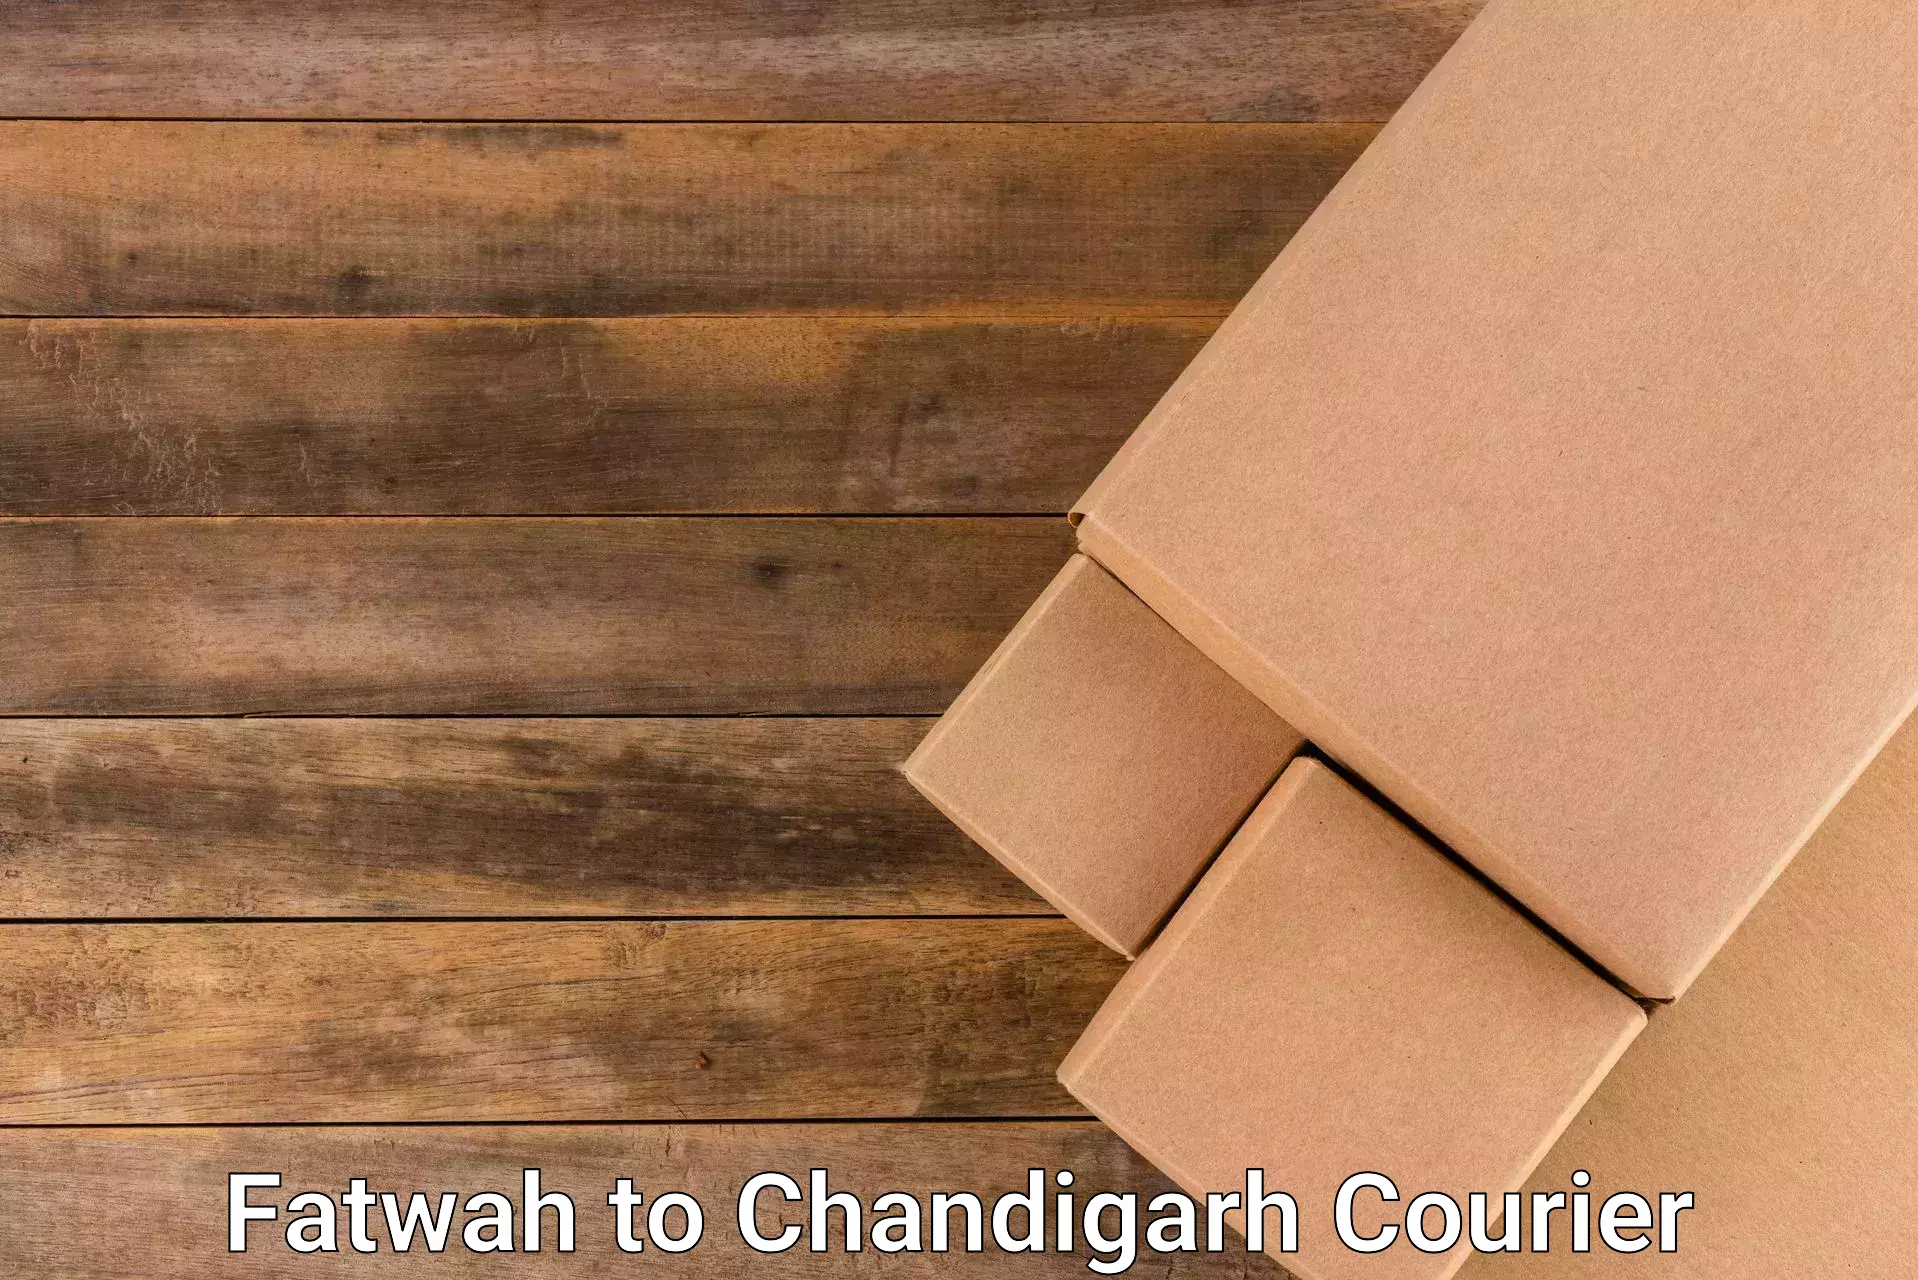 Next day courier in Fatwah to Chandigarh